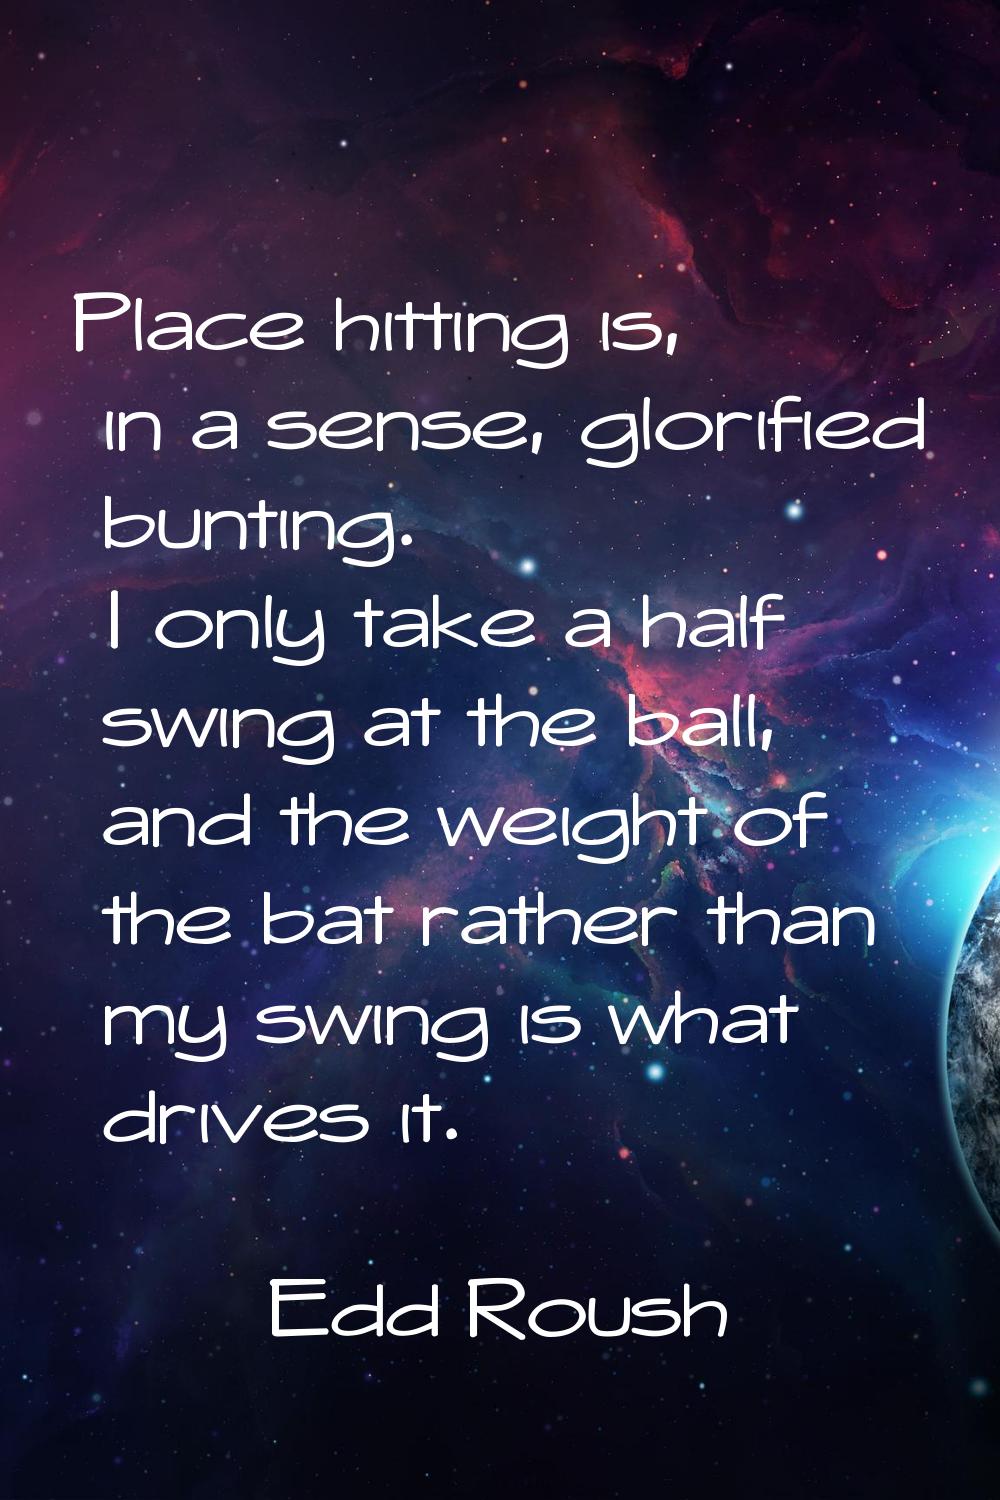 Place hitting is, in a sense, glorified bunting. I only take a half swing at the ball, and the weig